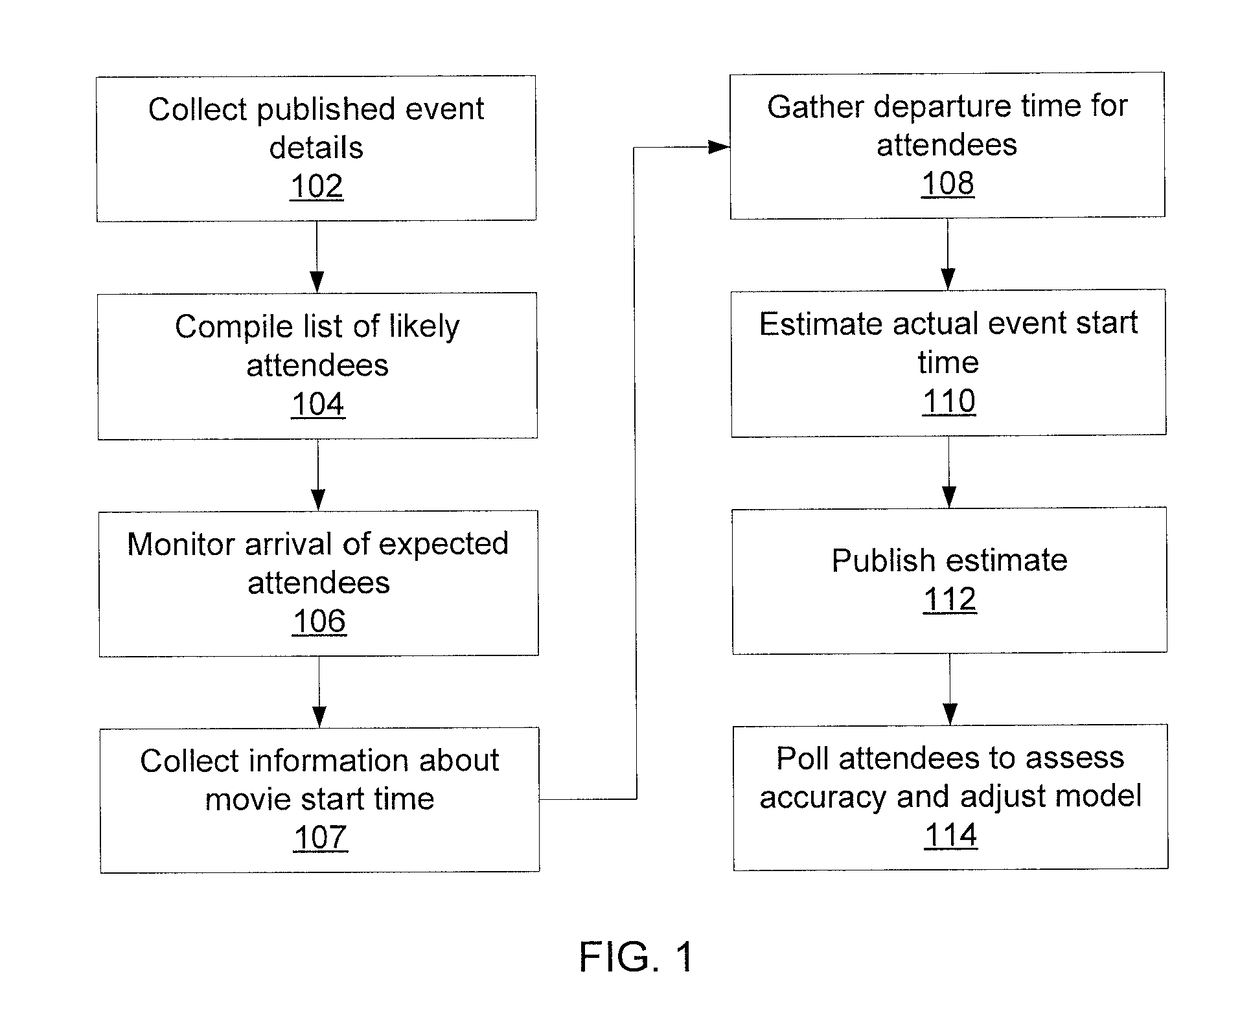 Predicting actual event times based on composite experience data